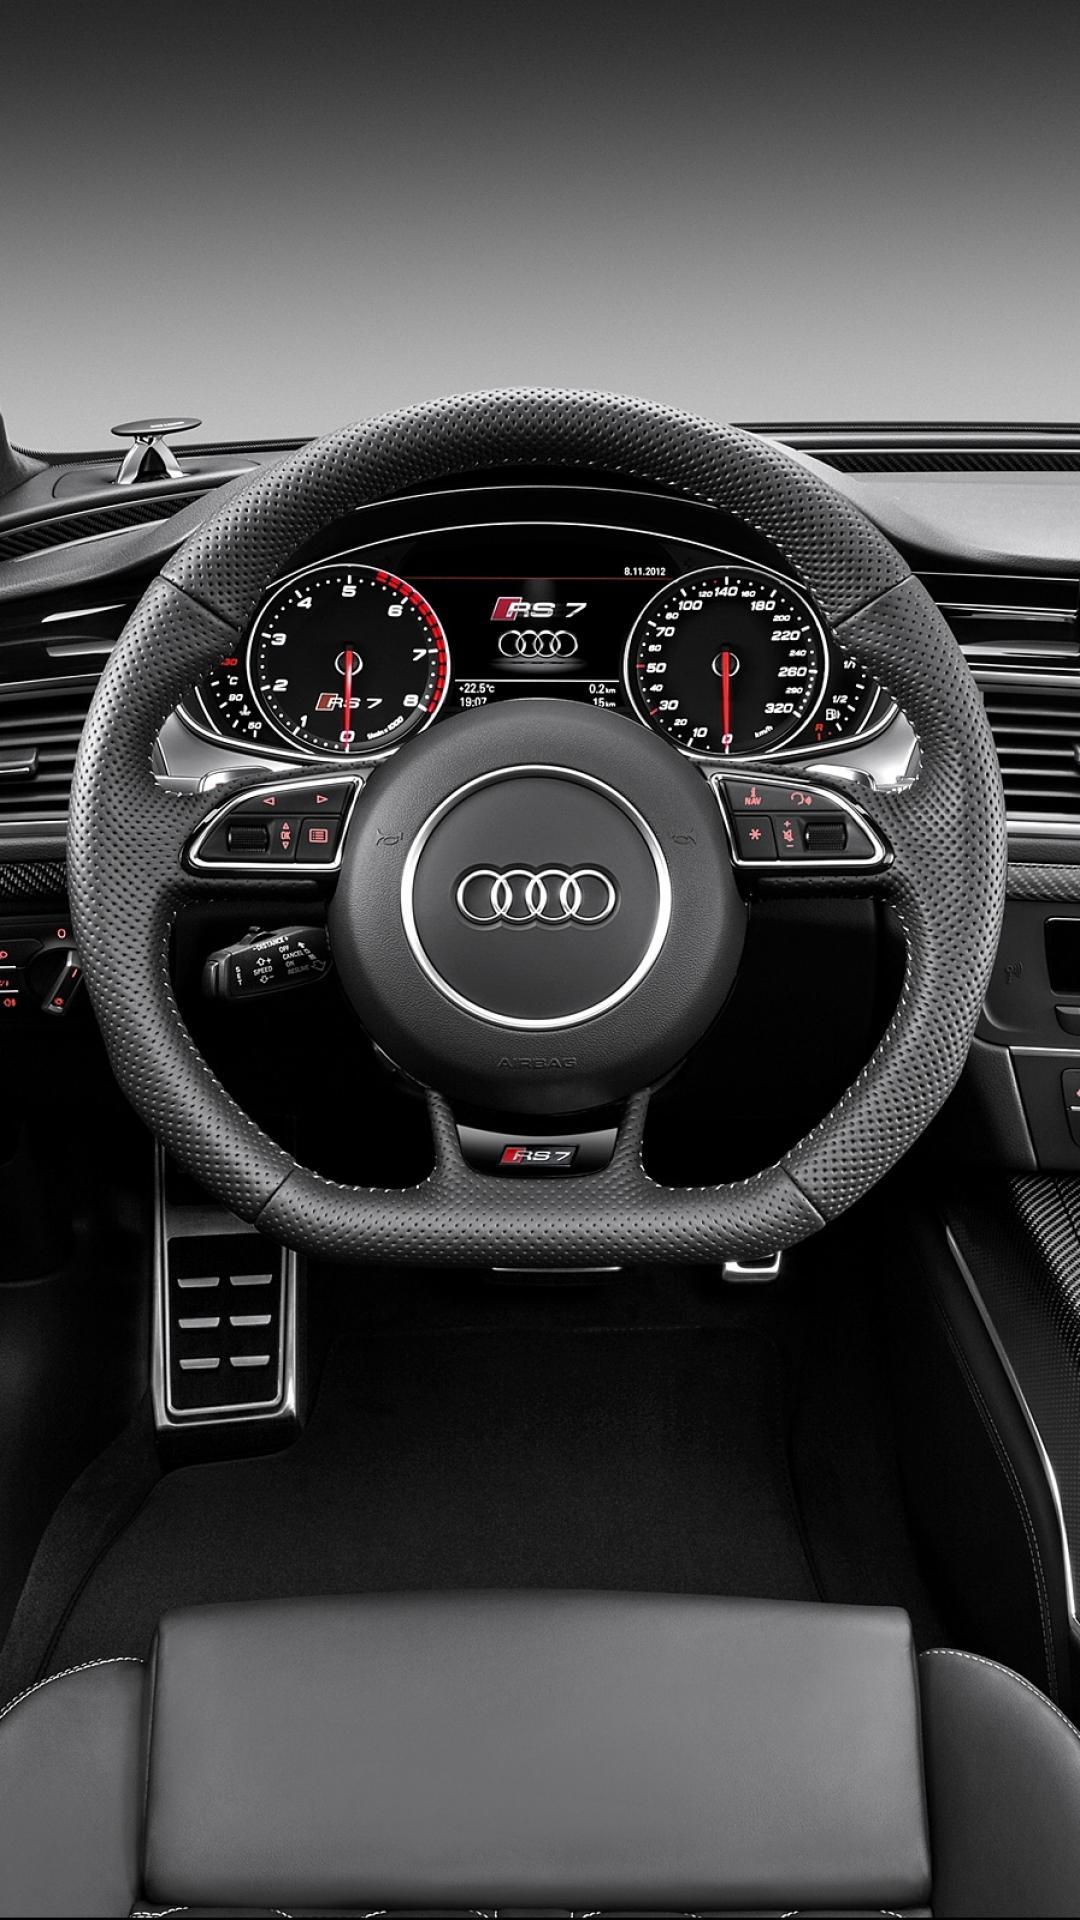 Audi Wallpaper iPhone Rs7 Price South Africa, HD